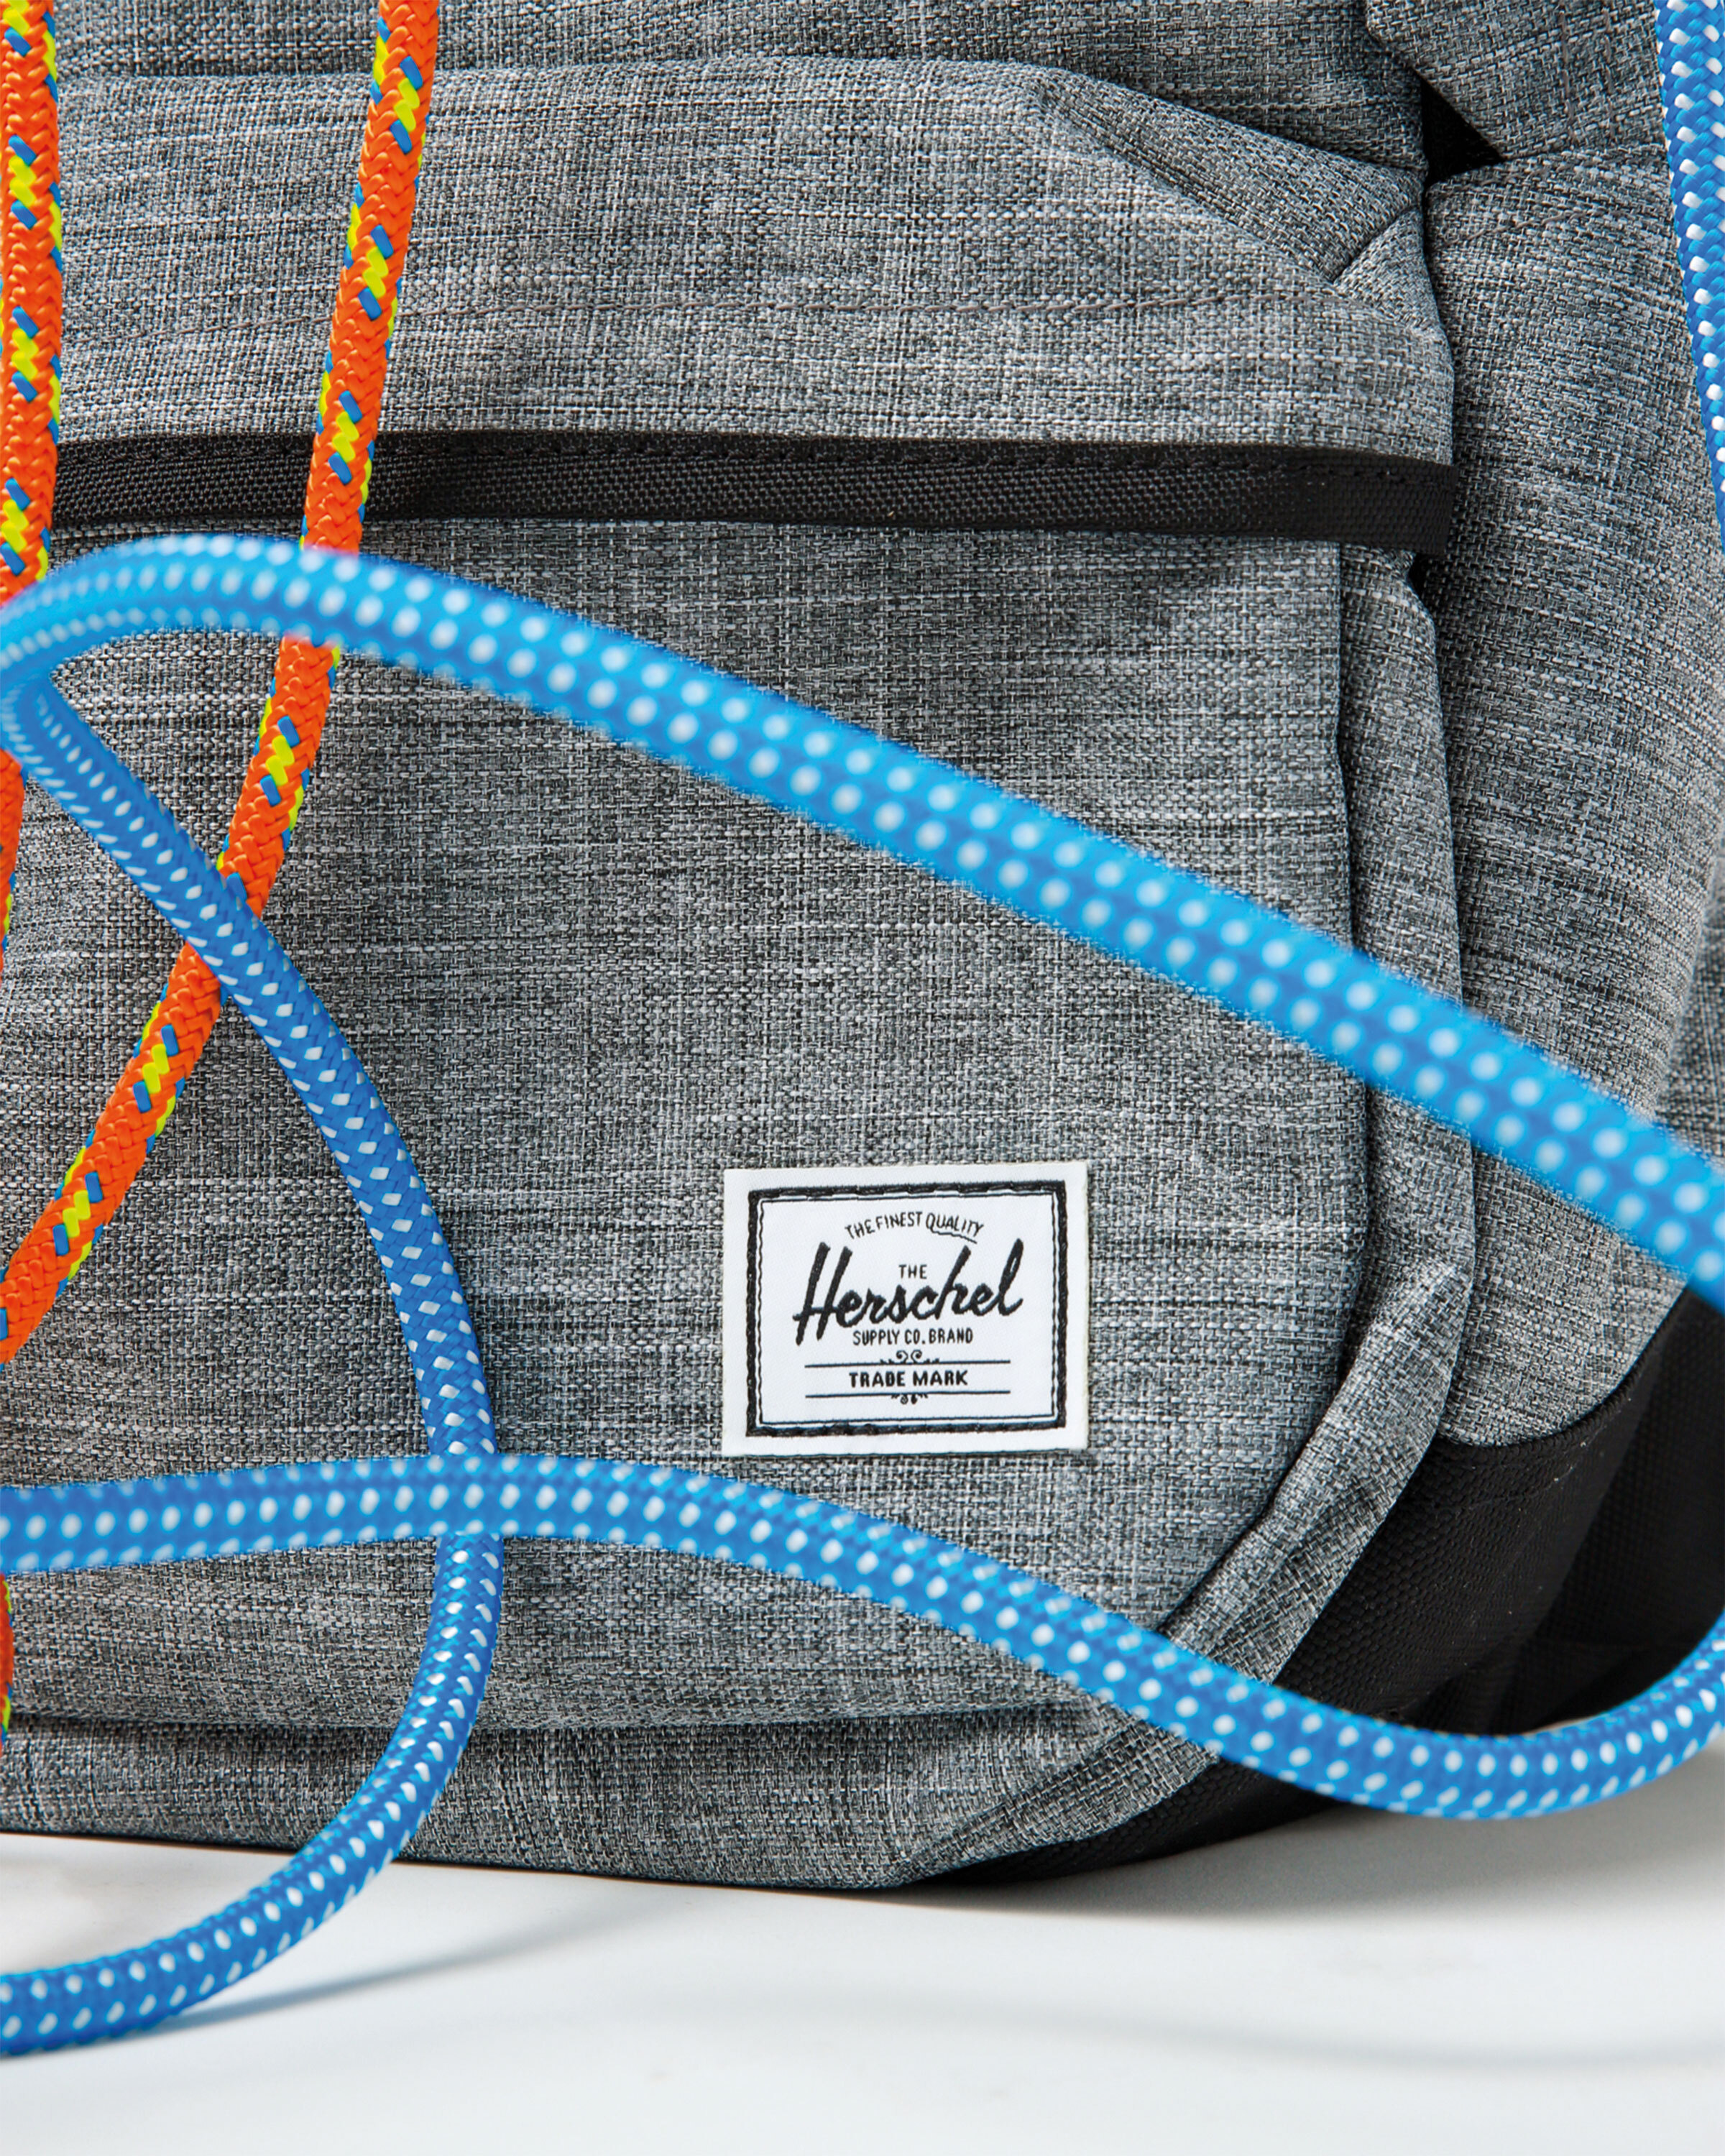 Pack your bags with Herschel